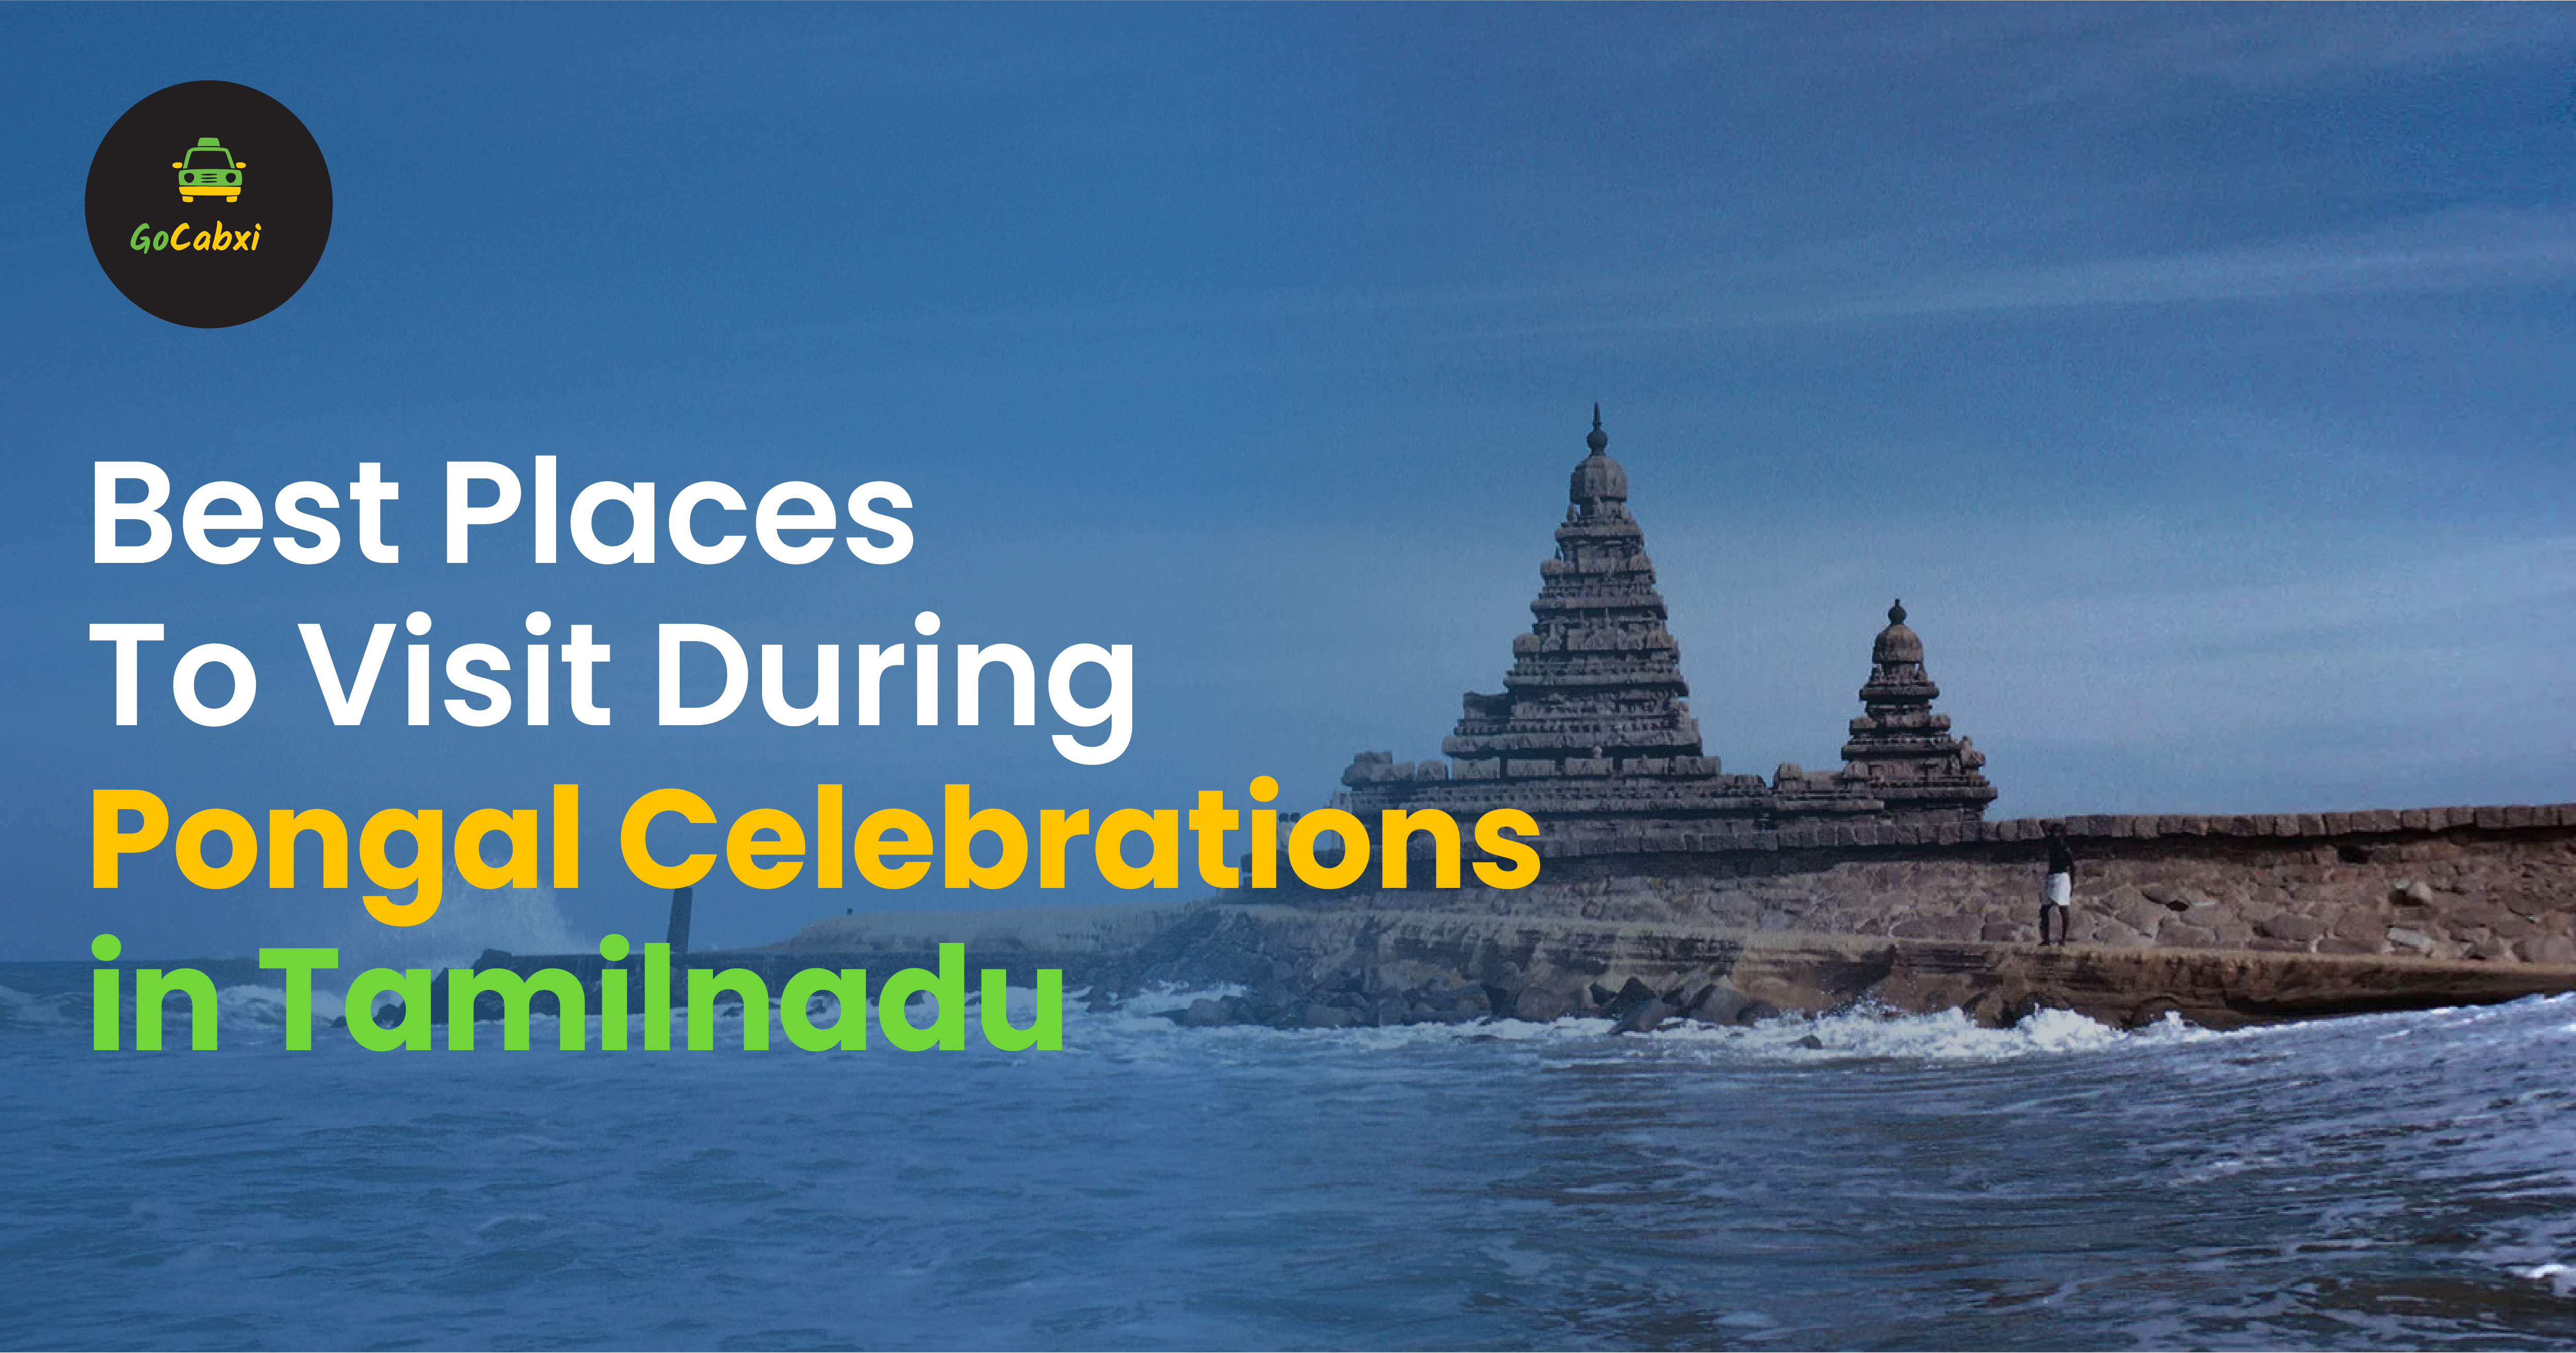 Best Places To Visit During Pongal Celebrations In Tamilnadu